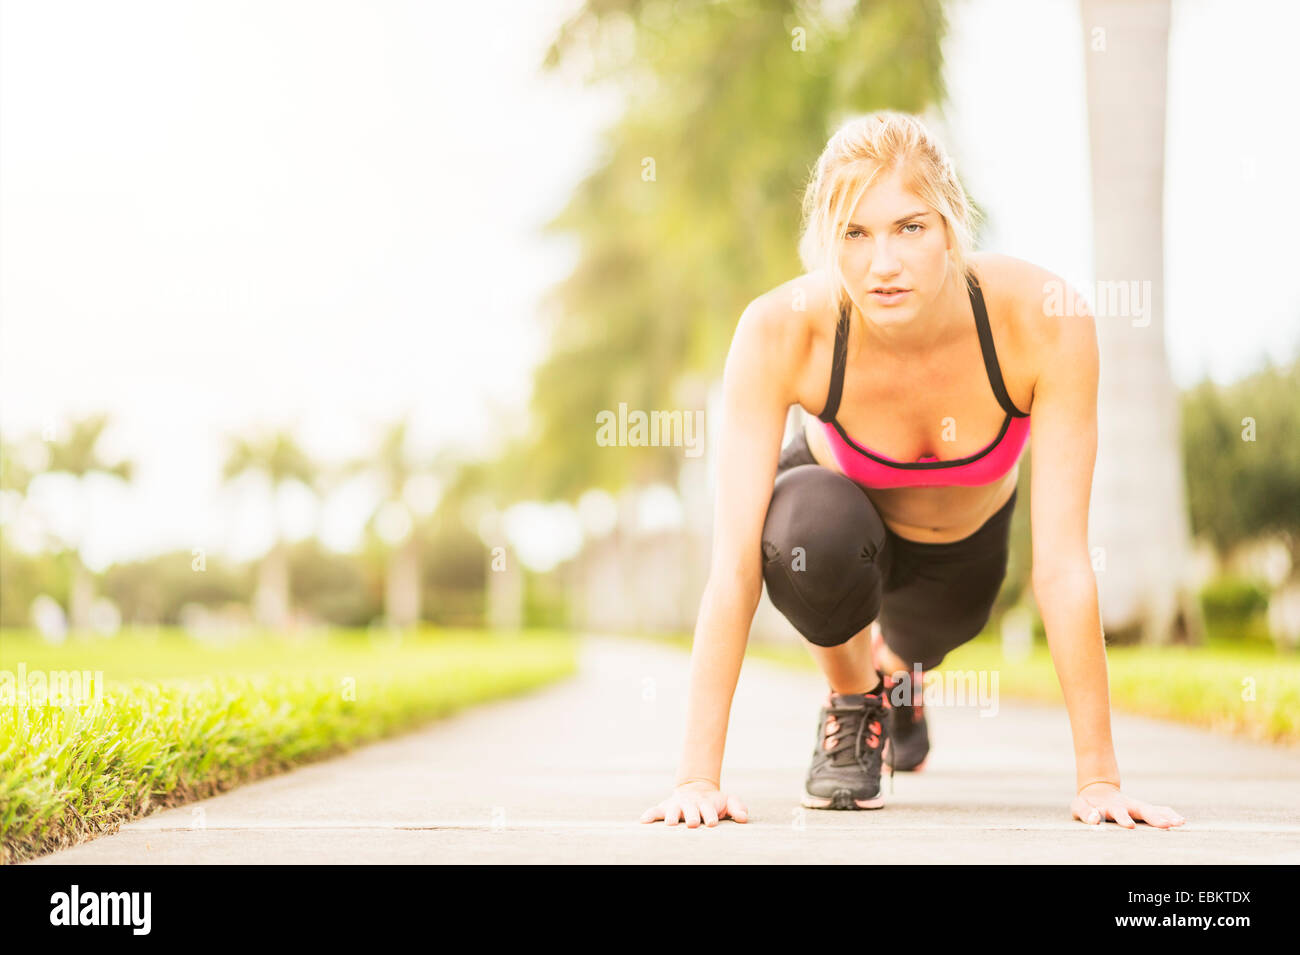 USA, Floride, Jupiter, Woman exercising outdoors Banque D'Images